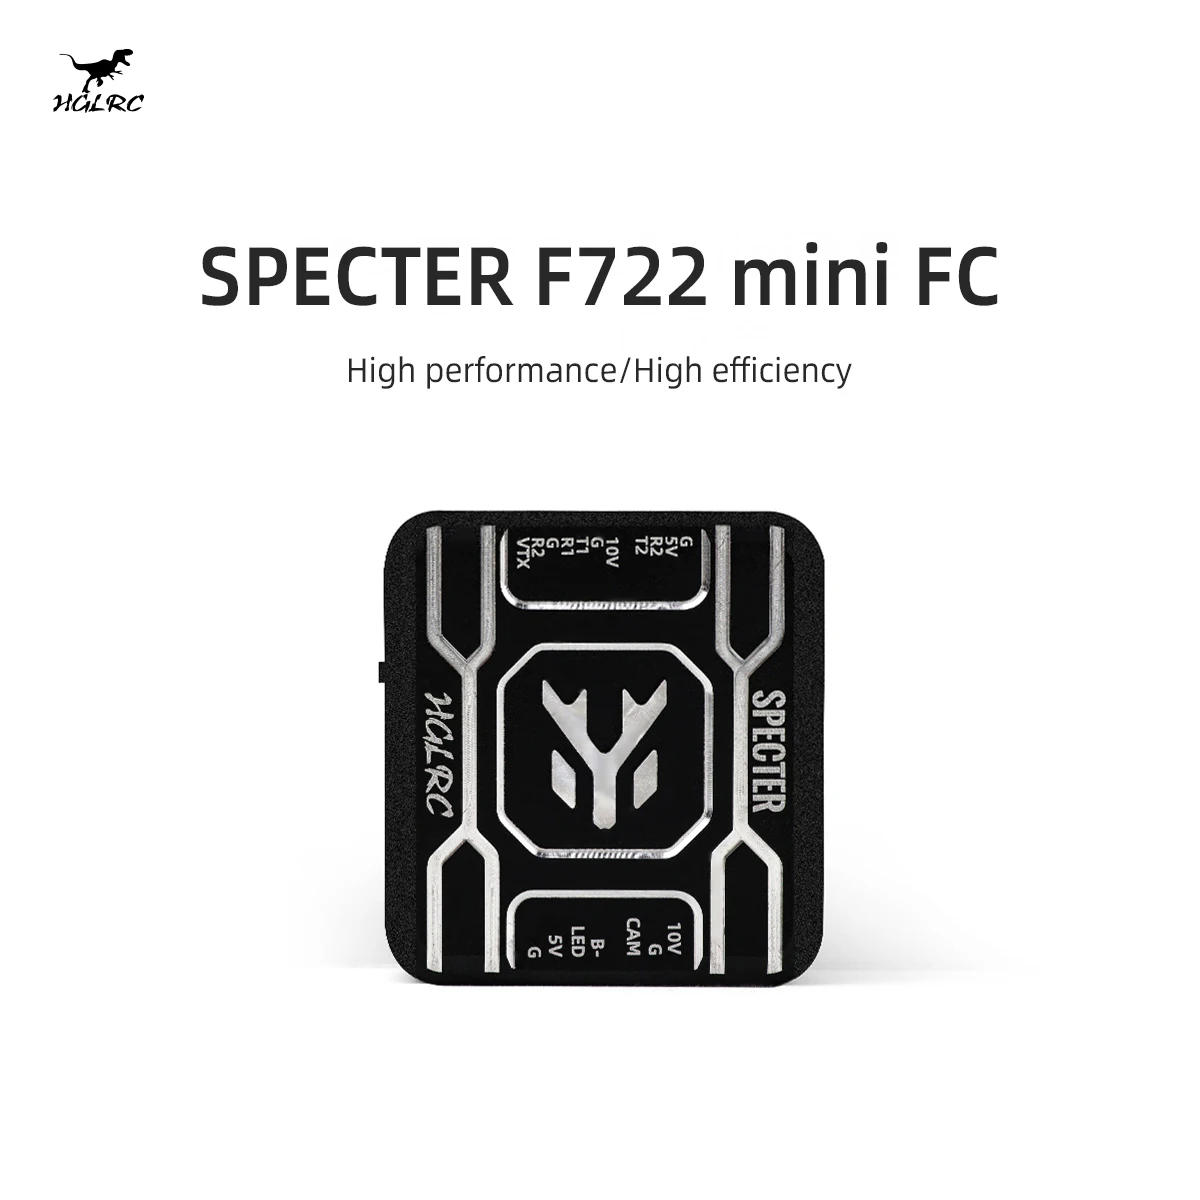 

HGLRC SPECTER F722 Mini Flight Controller MPU6000 OSD BARO 16MB DUAL BEC 20X20mm 2-6S for FPV Freestyle Drones